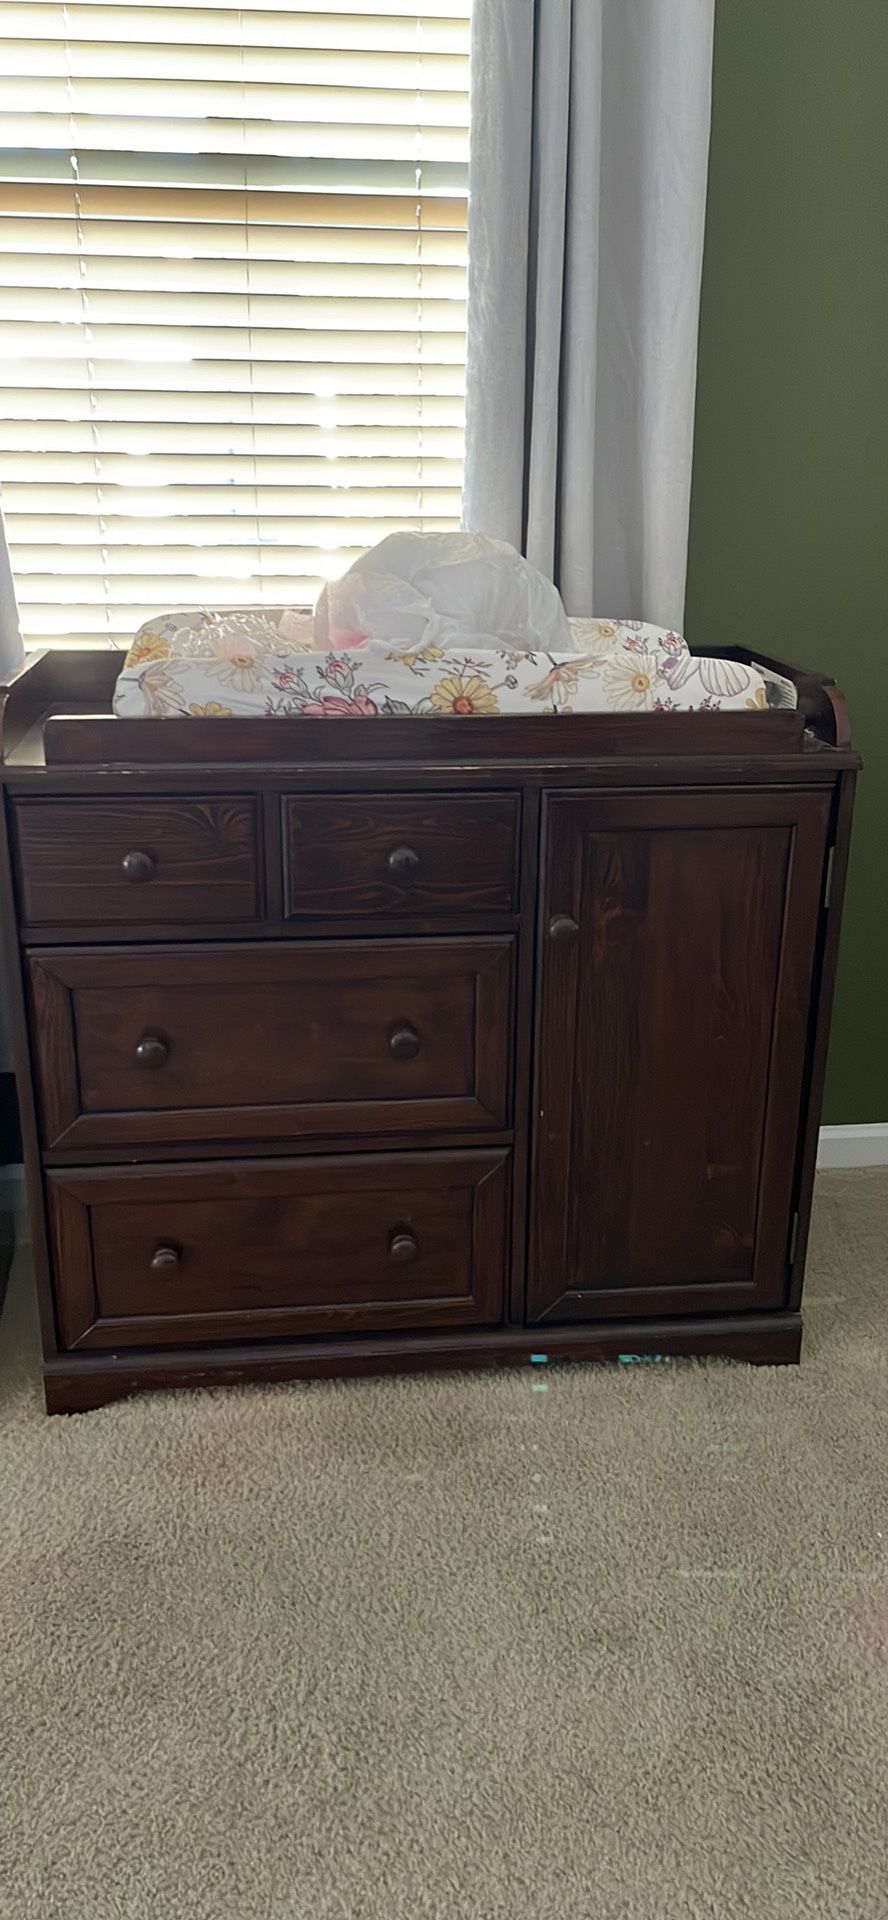 Pottery Barn changing Table